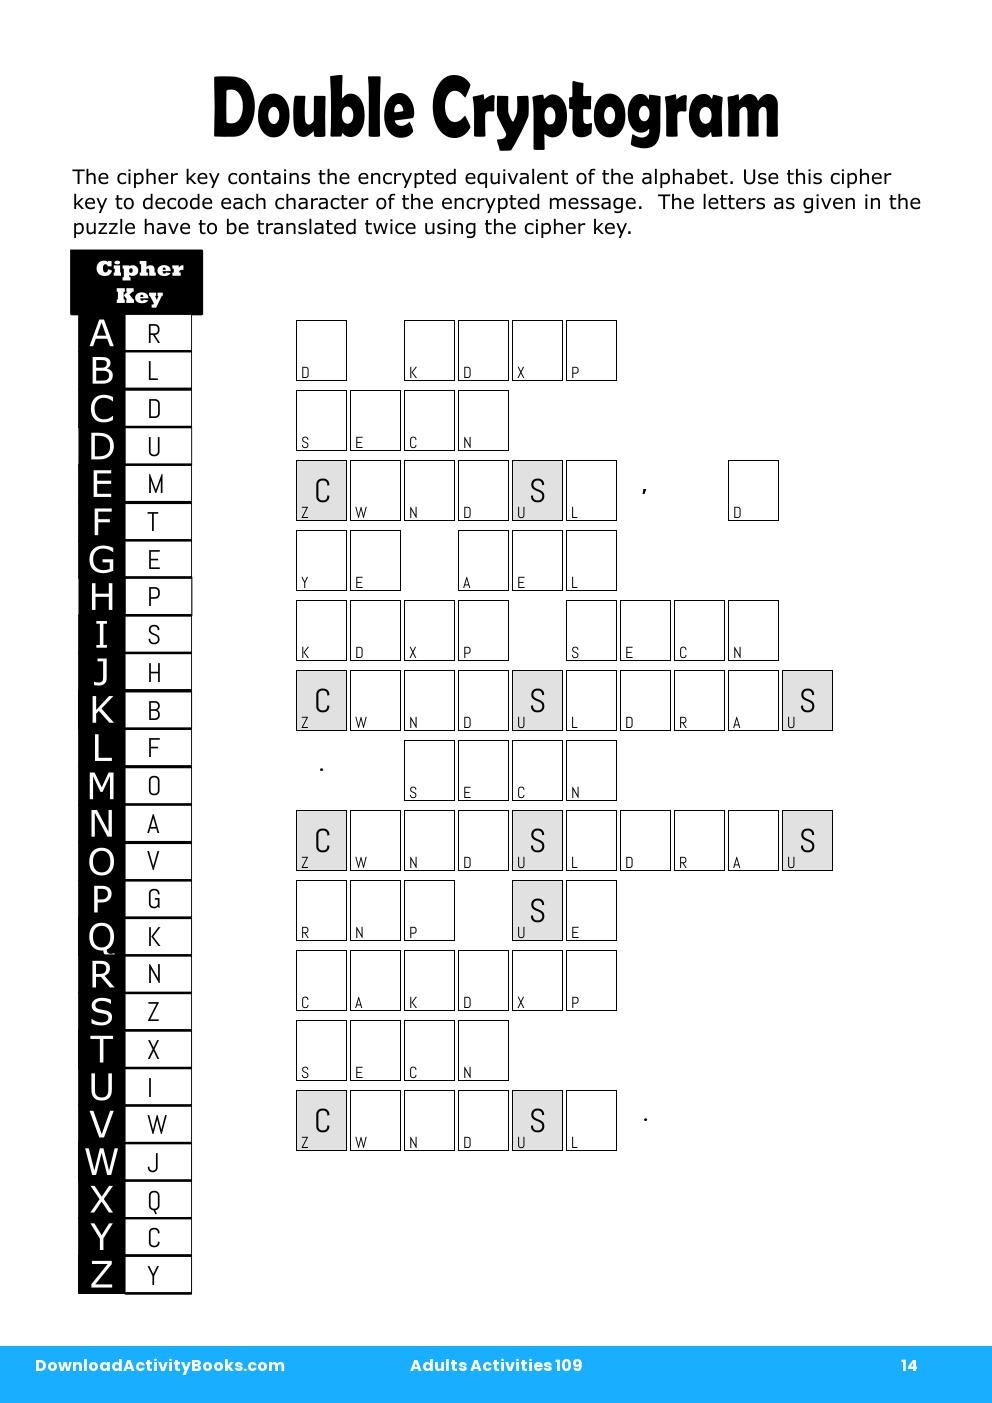 Double Cryptogram in Adults Activities 109